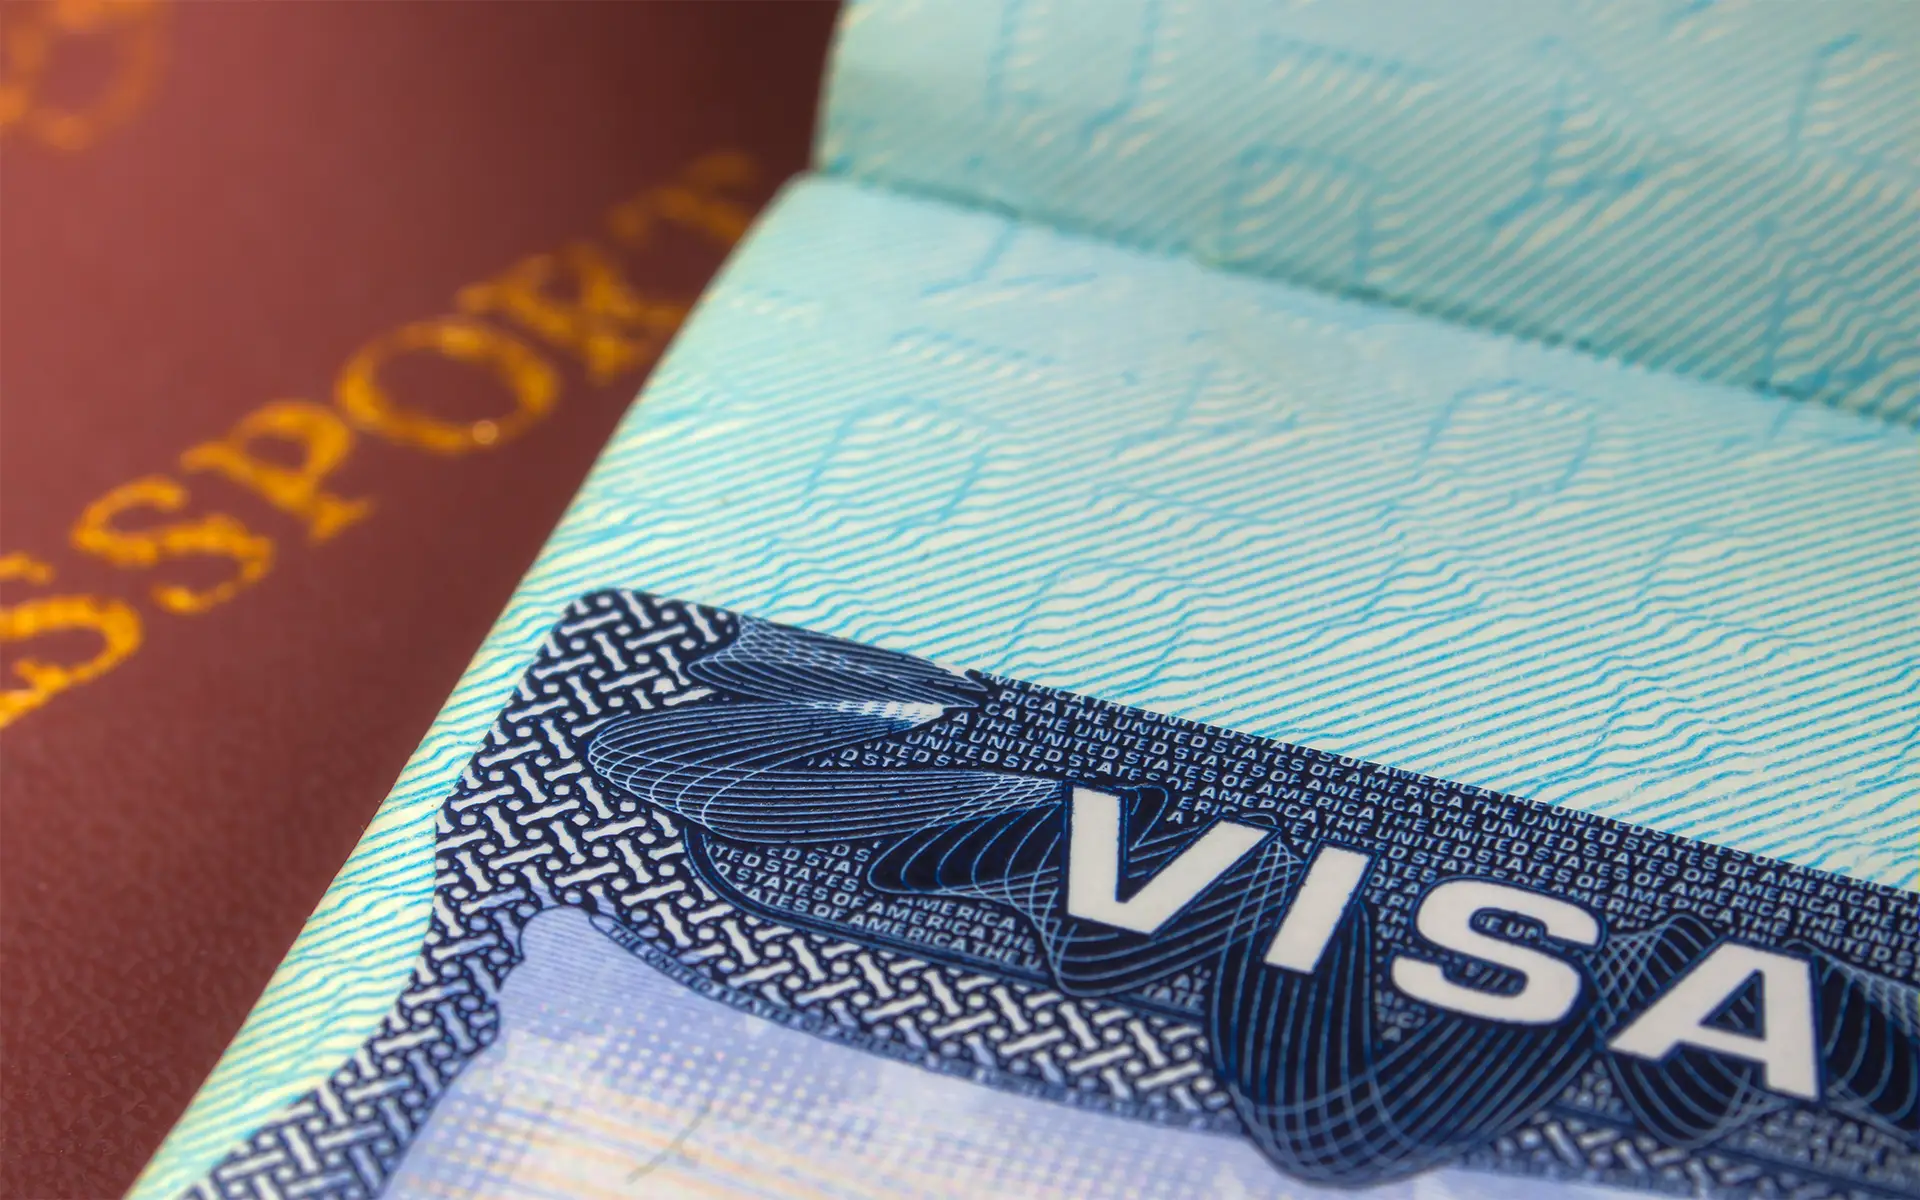 The essential traveler's guide to understanding various types of visas